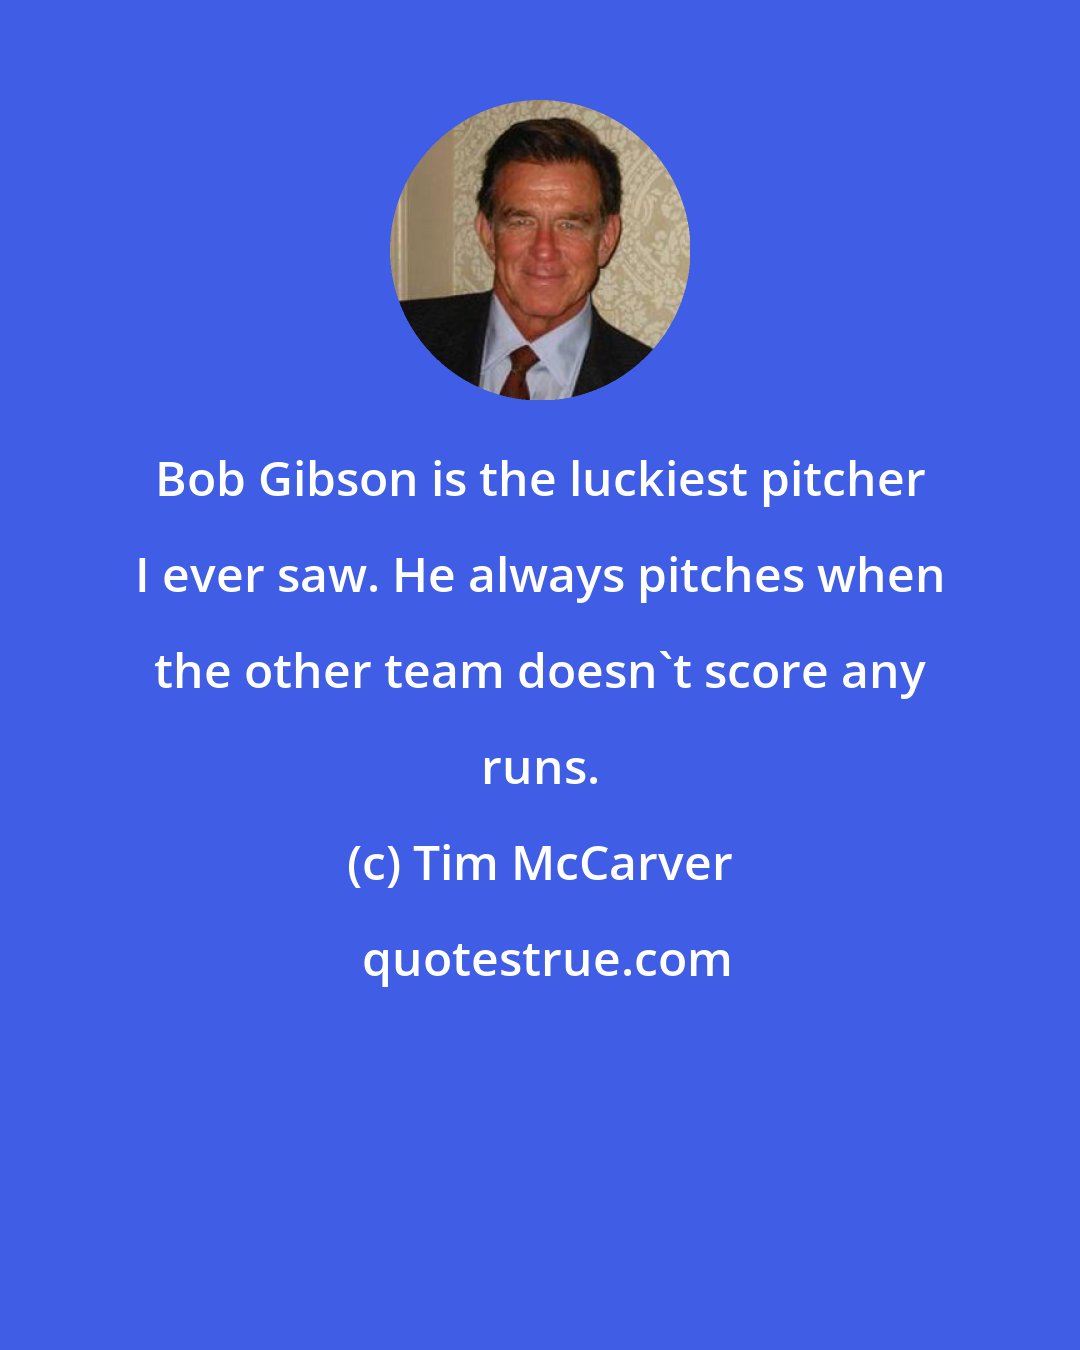 Tim McCarver: Bob Gibson is the luckiest pitcher I ever saw. He always pitches when the other team doesn't score any runs.